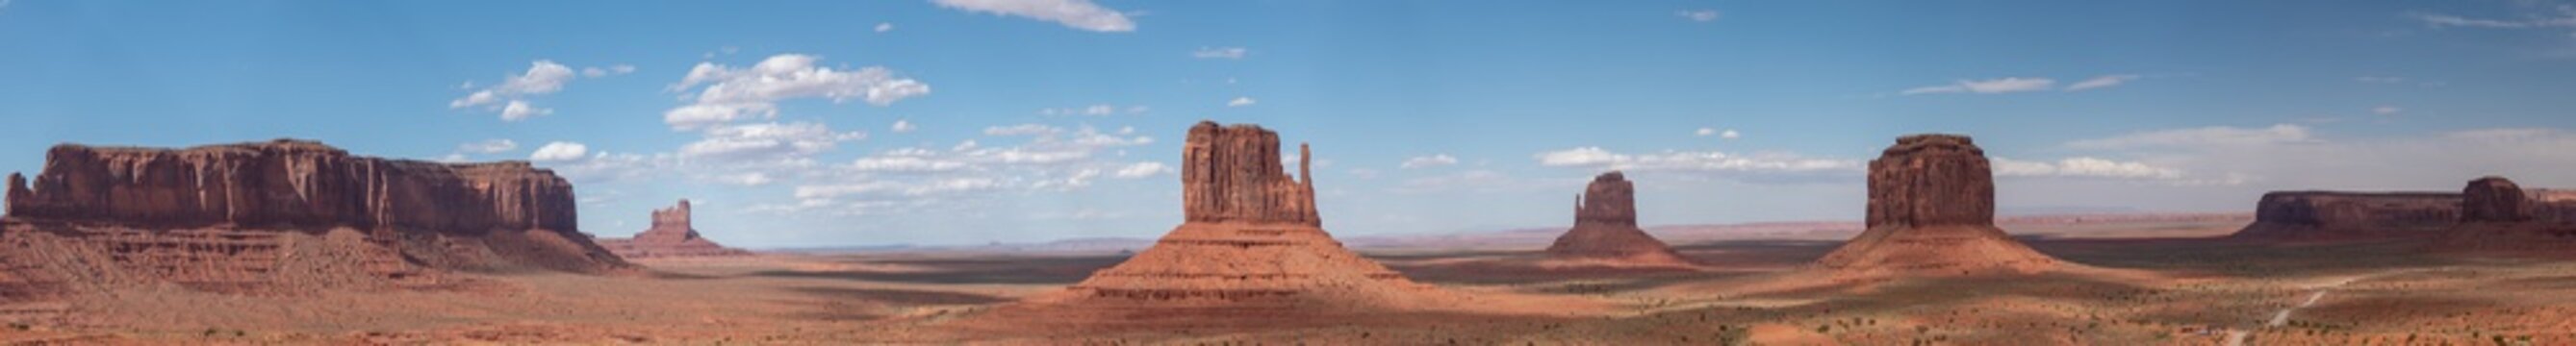 Wide panorama of the monument valley from the Visitor center